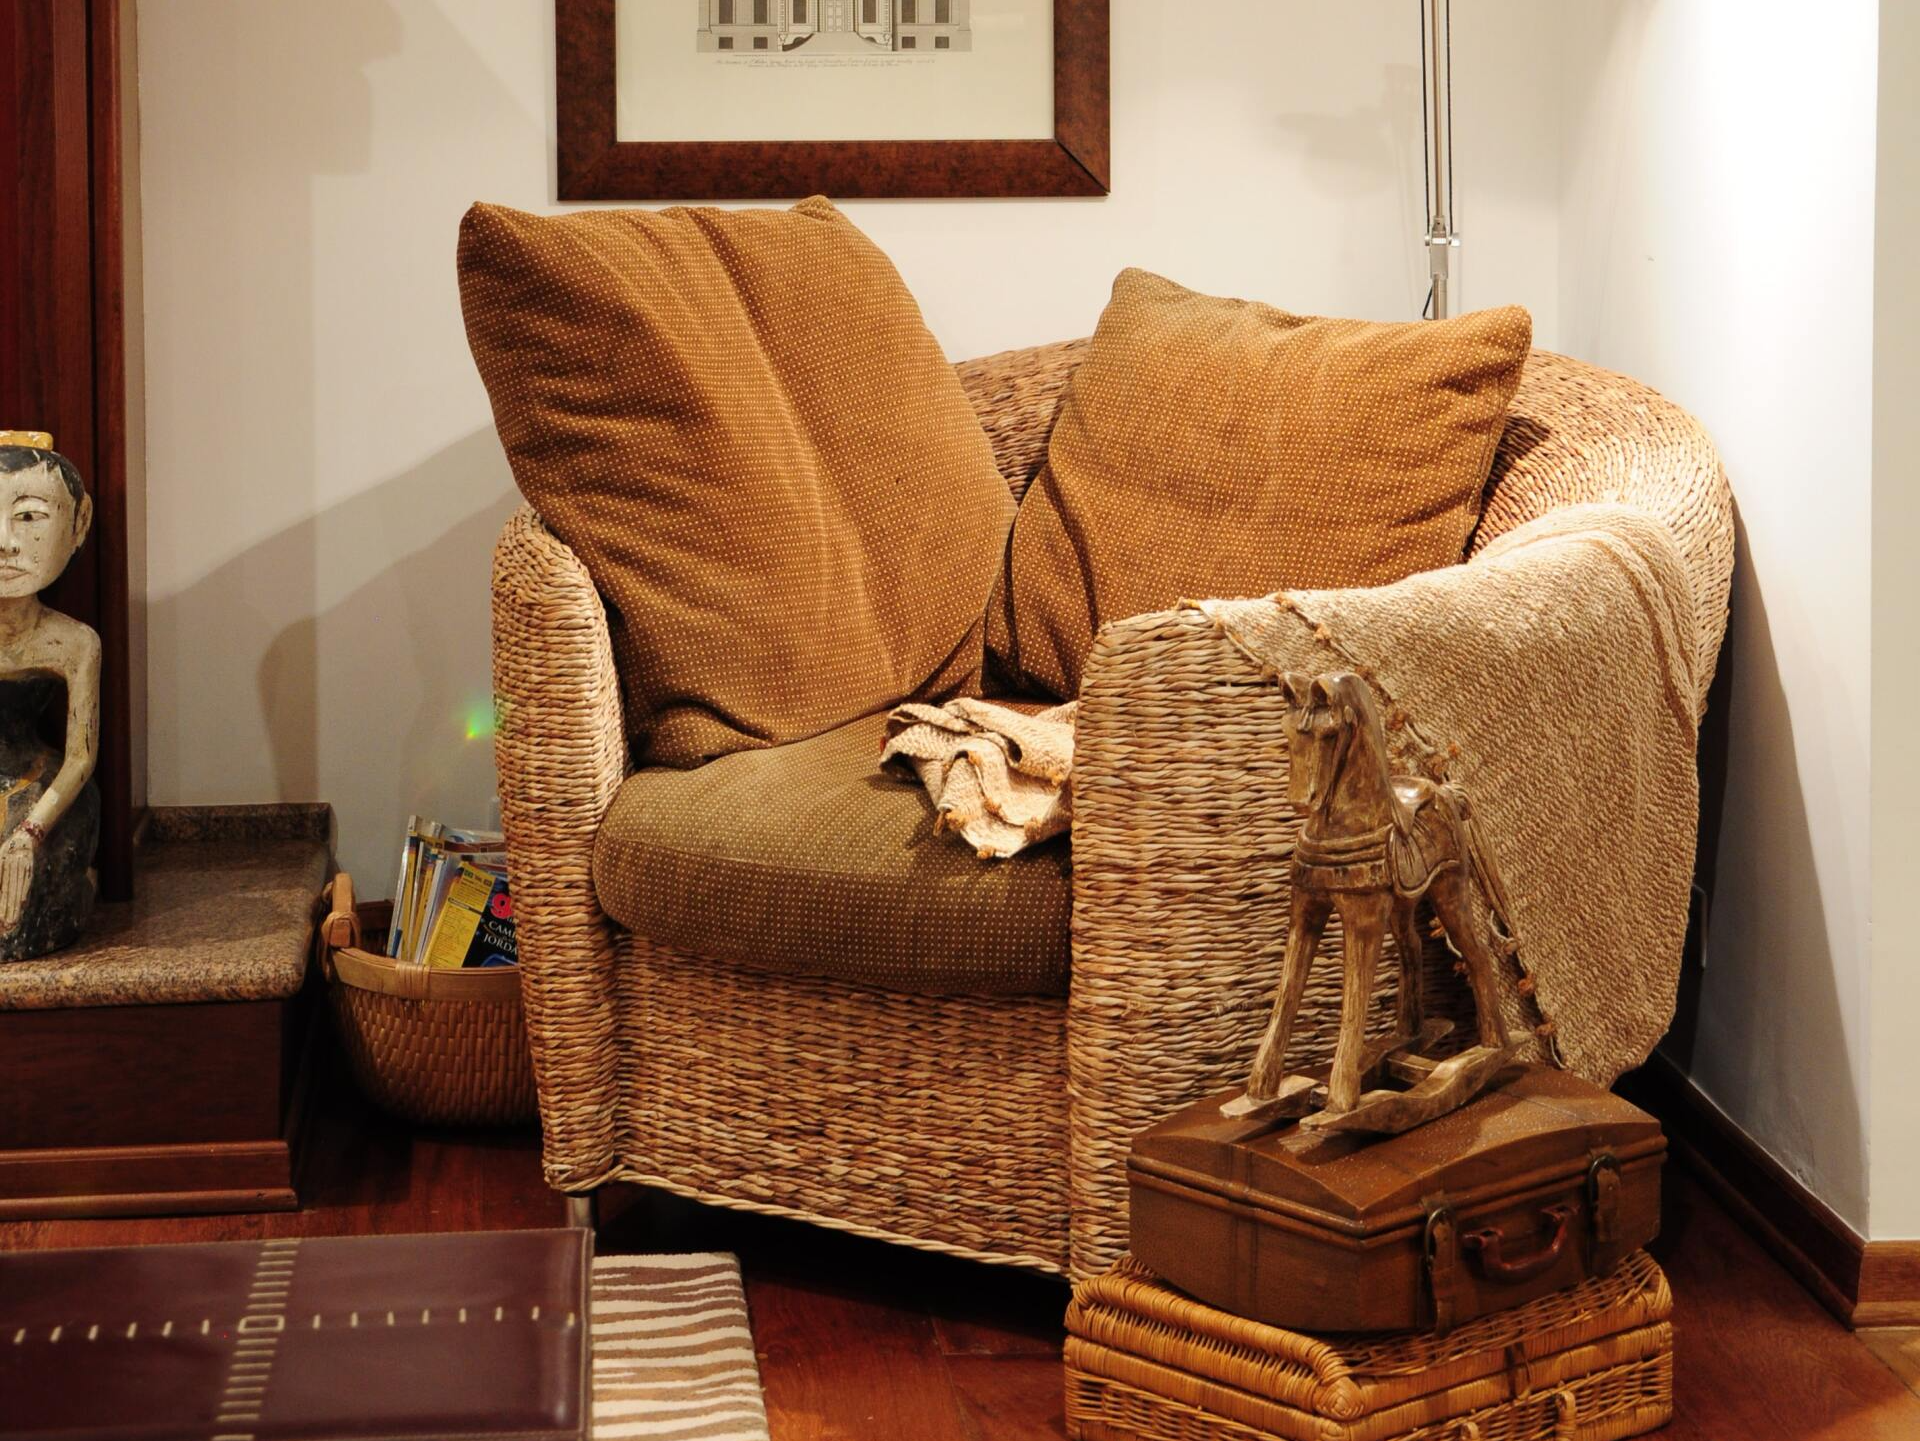 Wicker chair with brown pillows